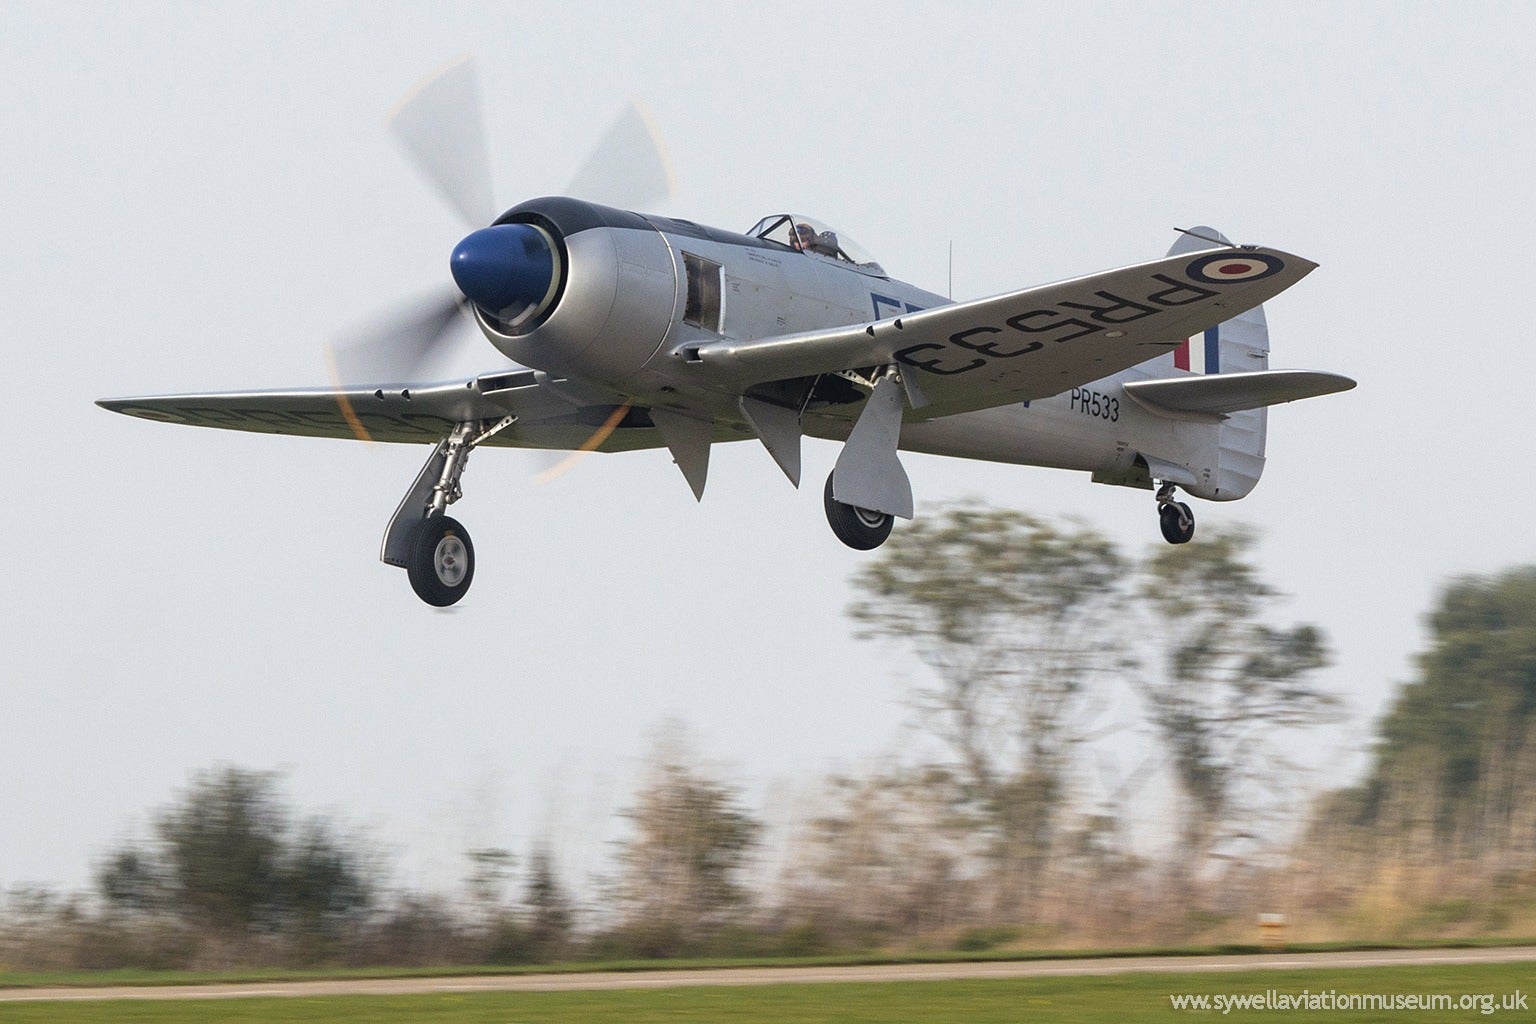 Rare Hawker Tempest Takes to the Skies After Restoration